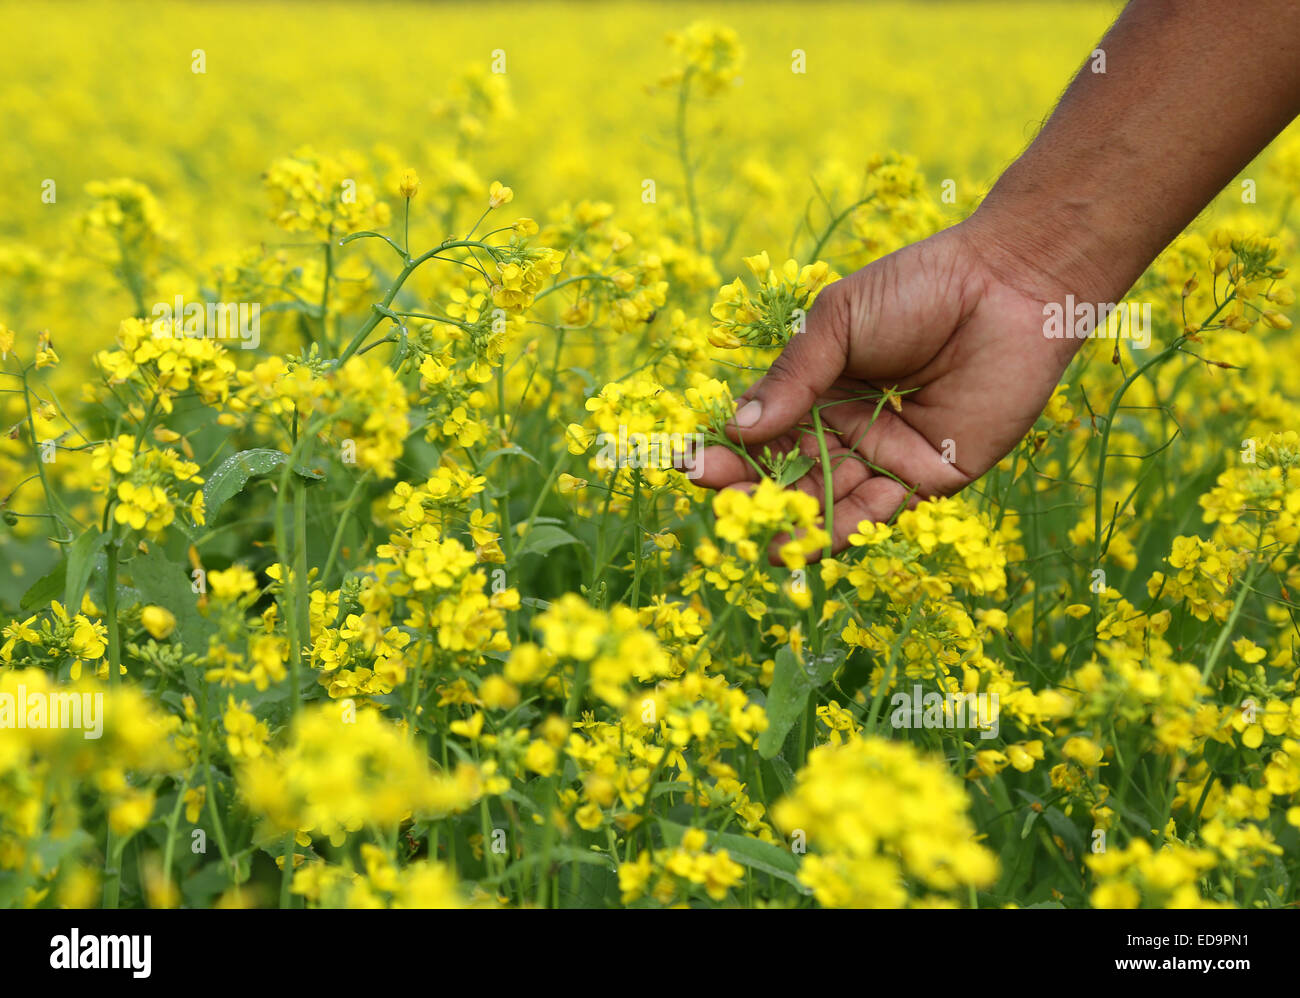 Farmers hand holds flowers in a mustard field Stock Photo